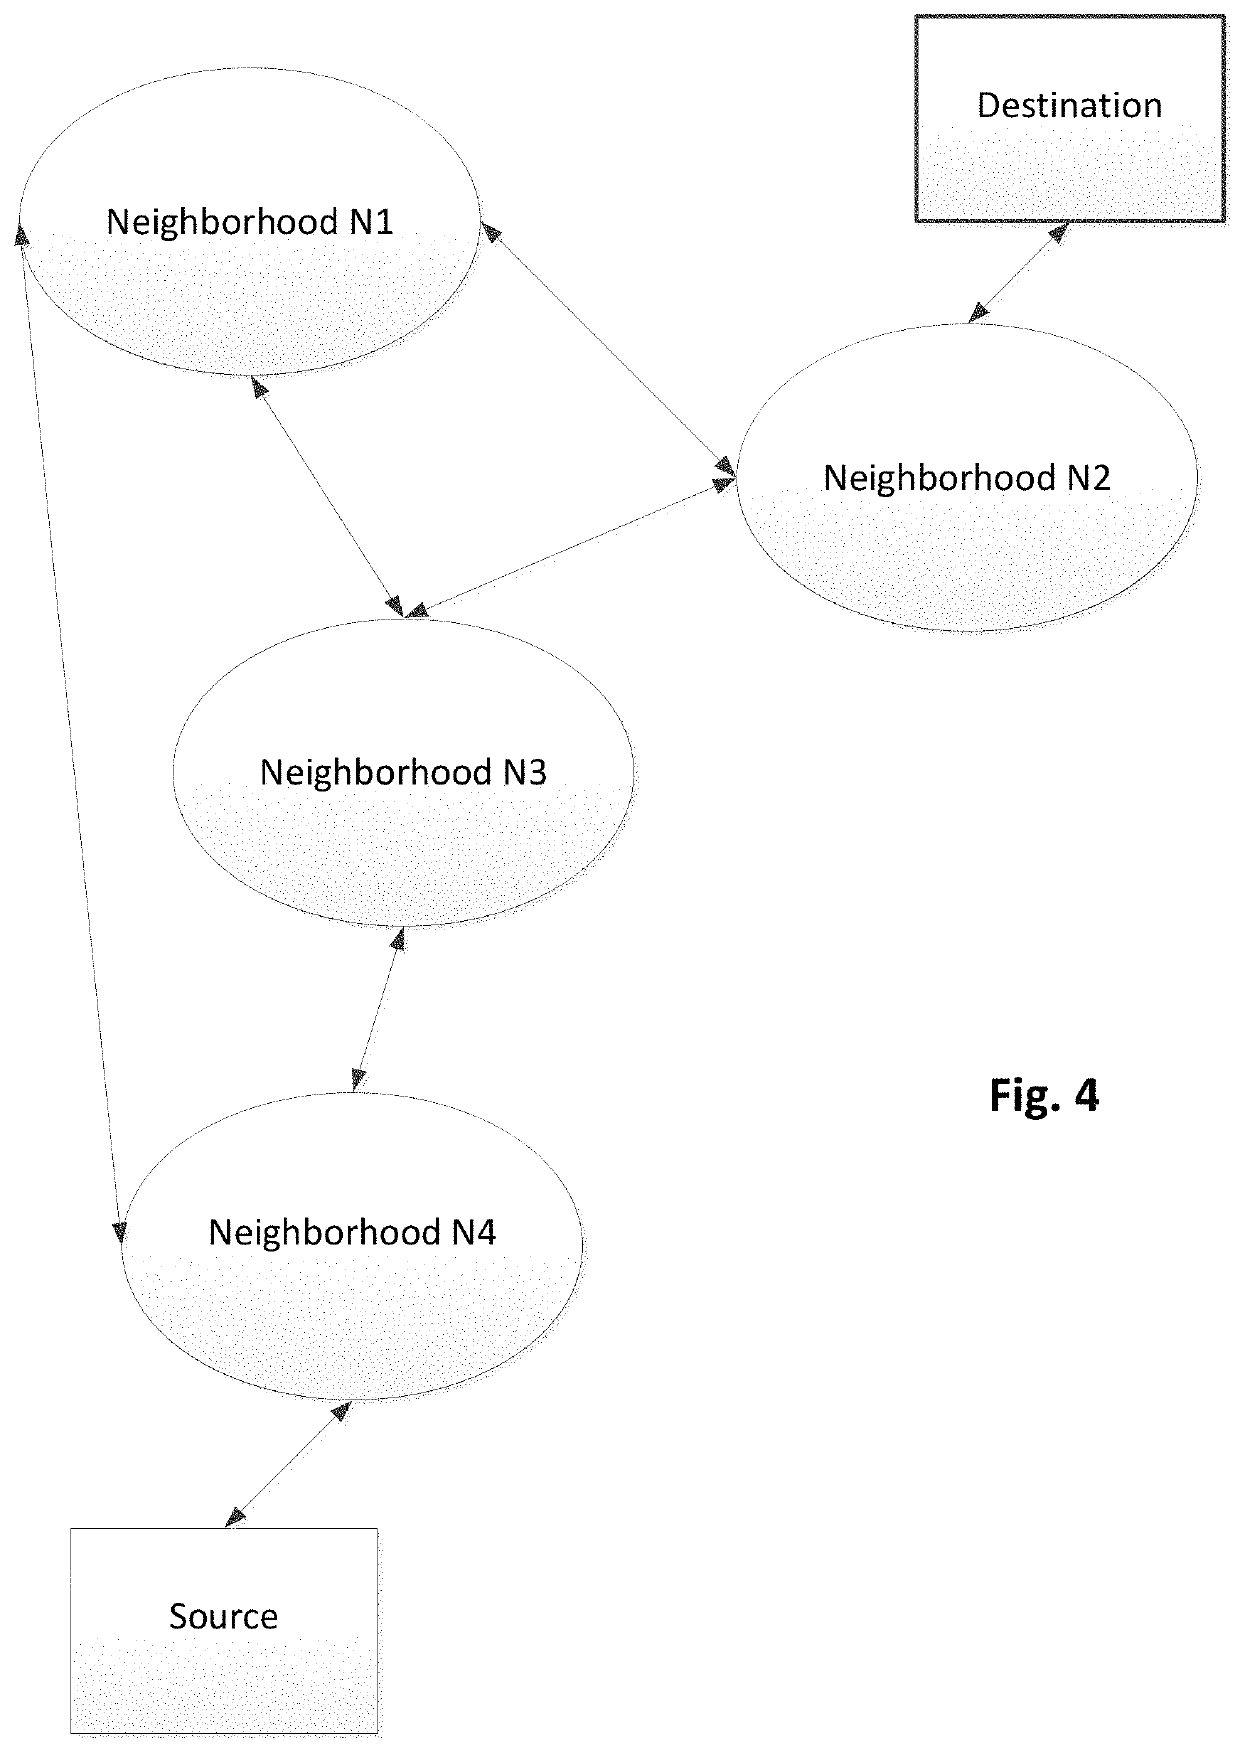 Network neighborhoods for establishing communication relationships between communication interfaces in an administrative domain